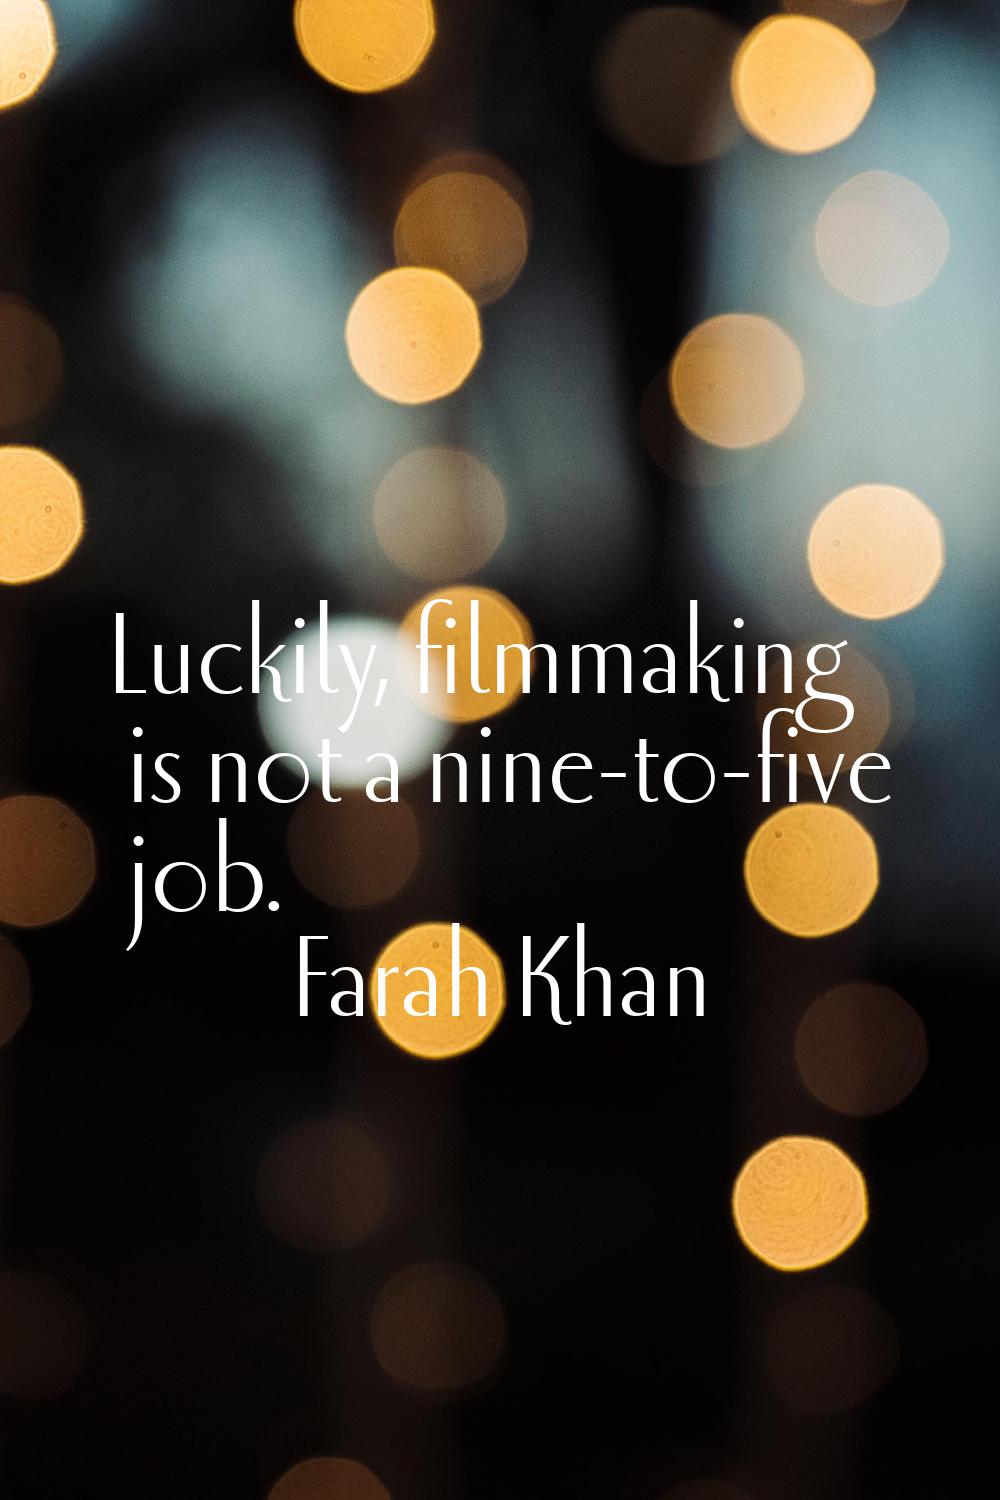 Luckily, filmmaking is not a nine-to-five job.